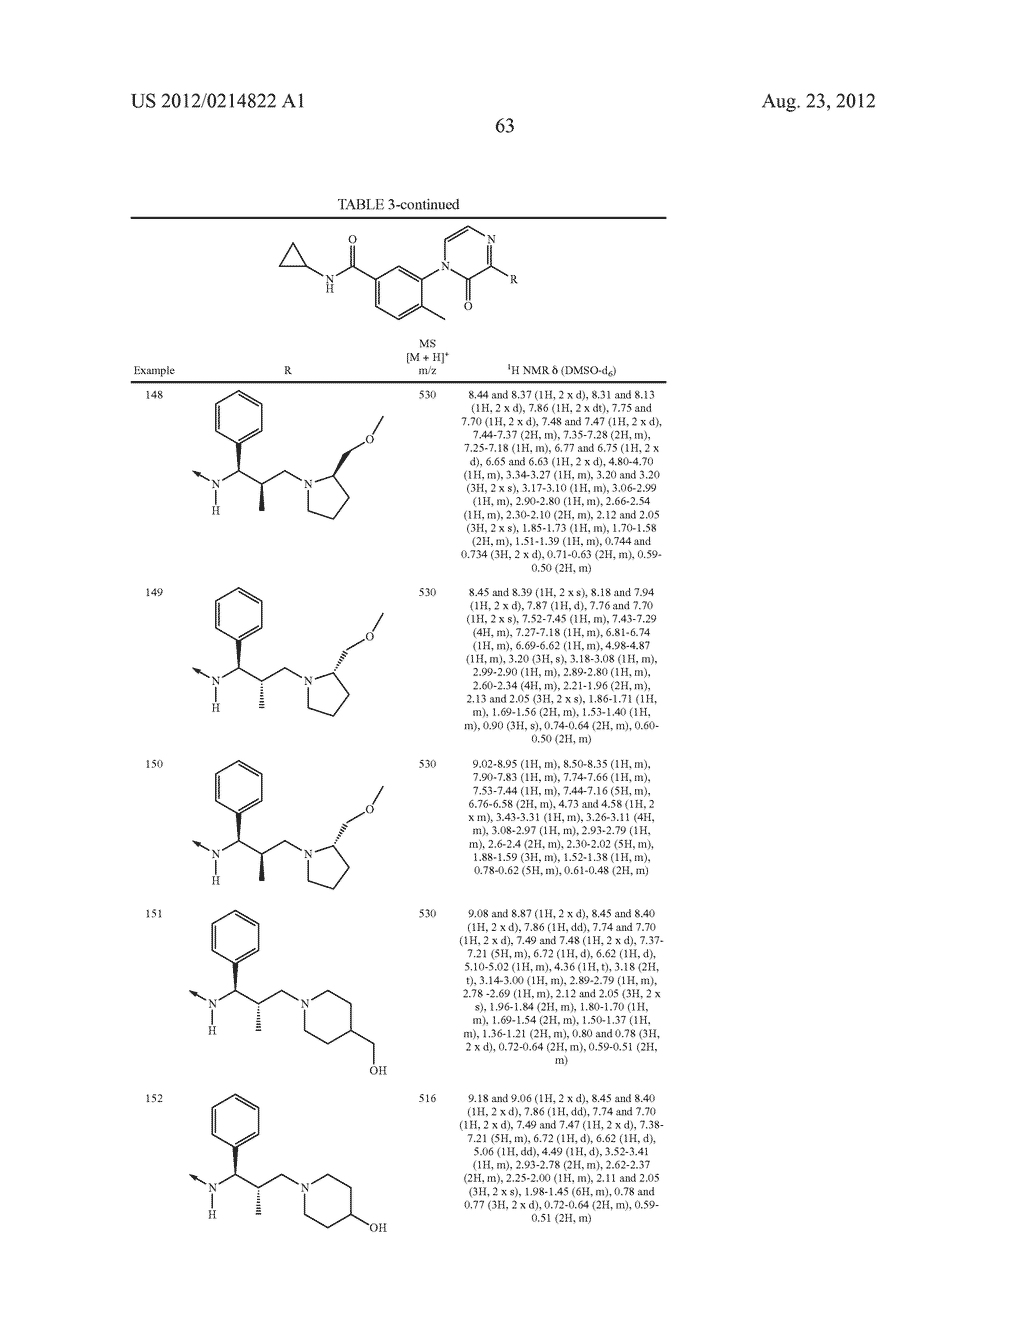 N-CYCLOPROPYL-3-FLUORO-5-[3-[[1-[2-[2-  [(2-HYDROXETHYL)AMINO]     ETHOXY]PHENYL] CYCLOPROPYL] AMINO]-2-OXO- 1     (2H)-PYRAZINYL]-4-METHYL-BENZAMIDE, OR PHARMACEUTICALLY ACCEPTABLE SALTS     THEREOF AND THEIR USES - diagram, schematic, and image 70